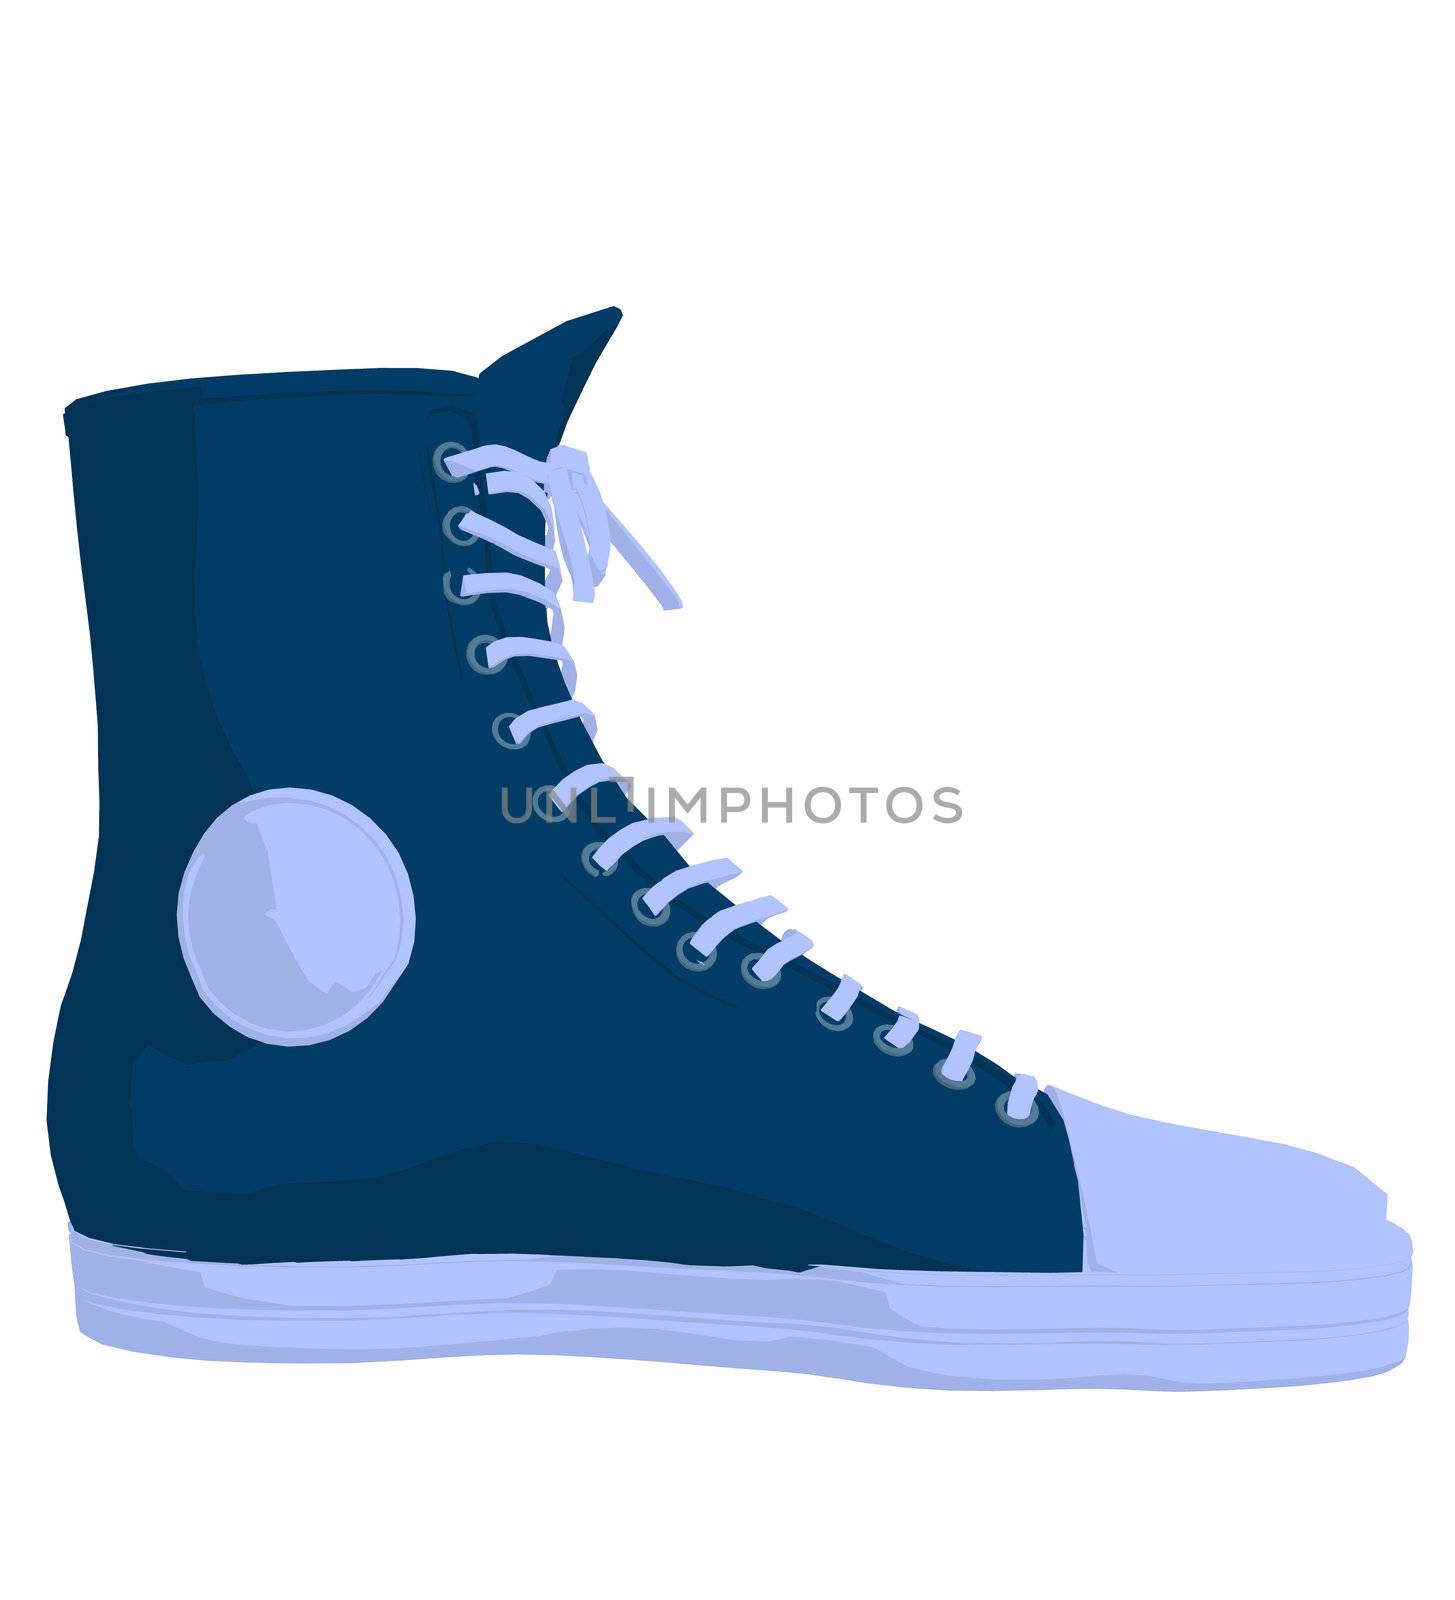 Basketball sneakers on a white background